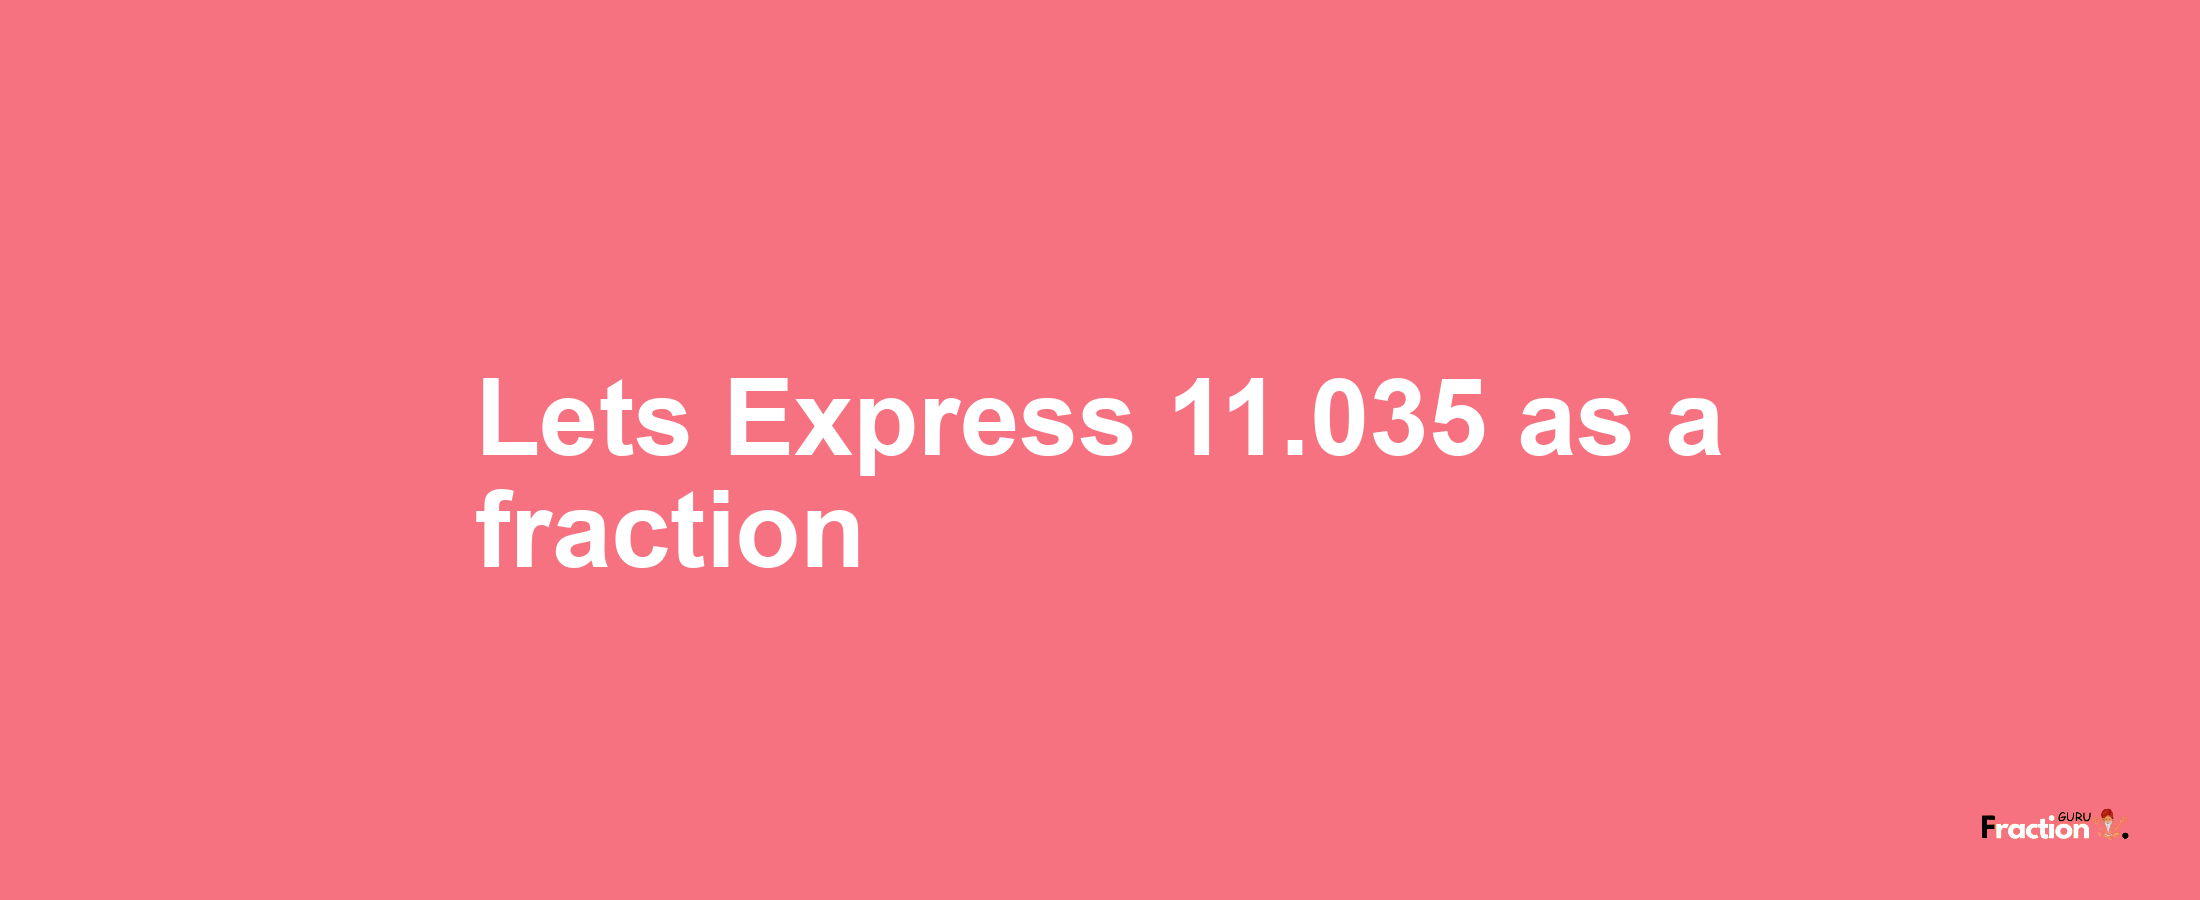 Lets Express 11.035 as afraction